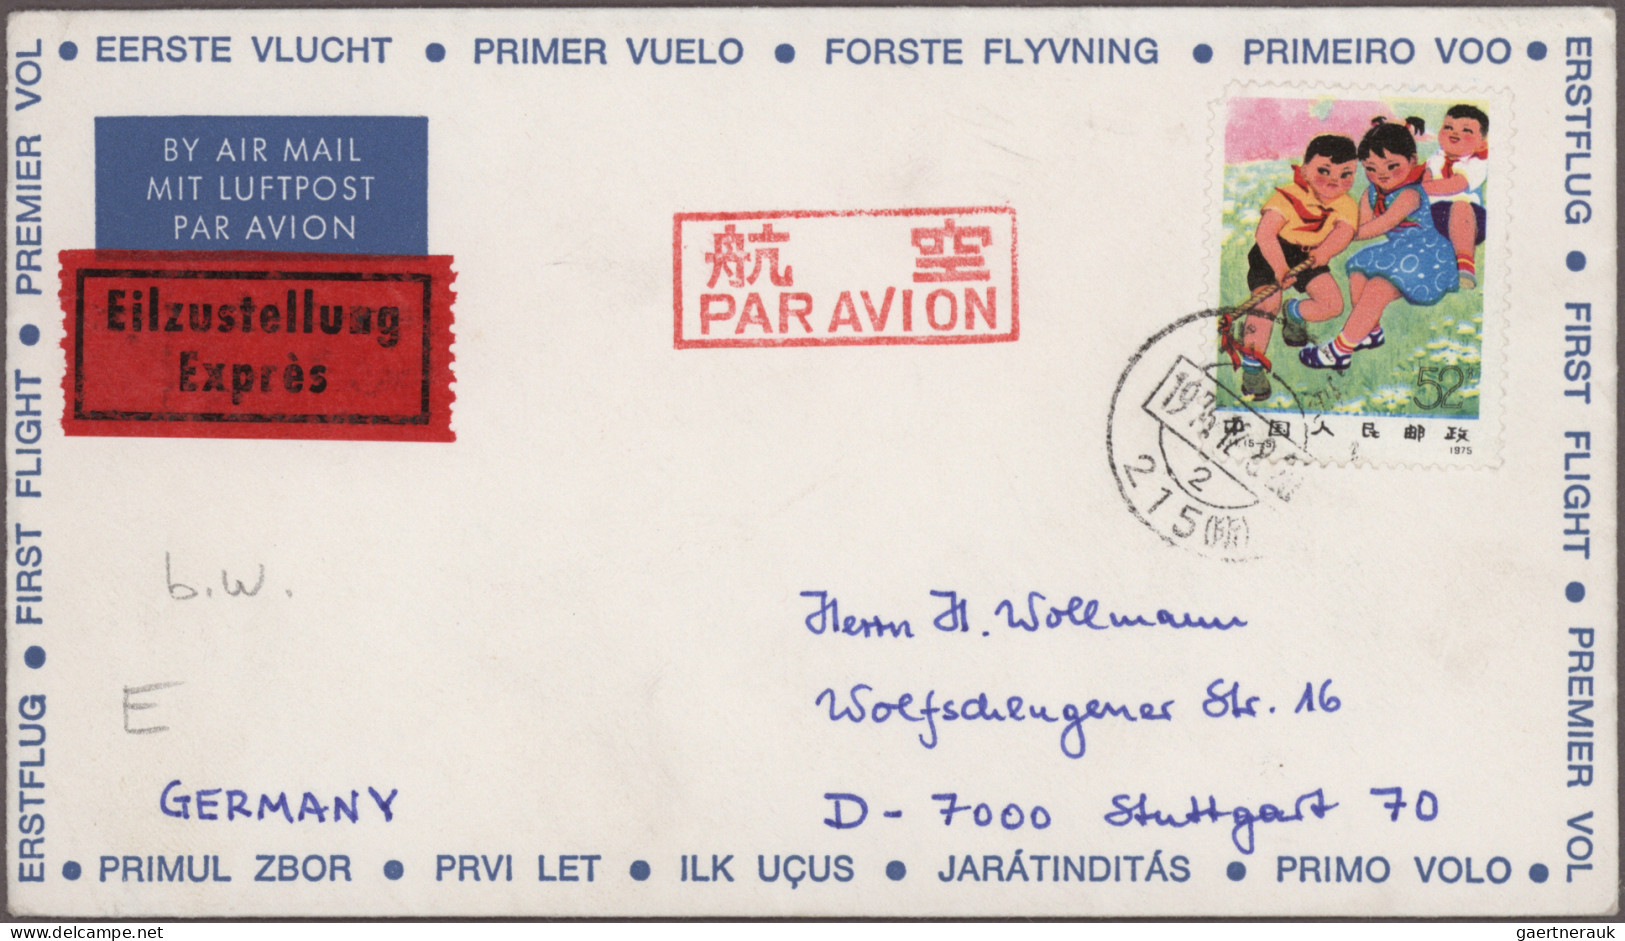 Air Mail: 1935/1986, balance of apprx. 155 airmail covers/cards worldwide with c